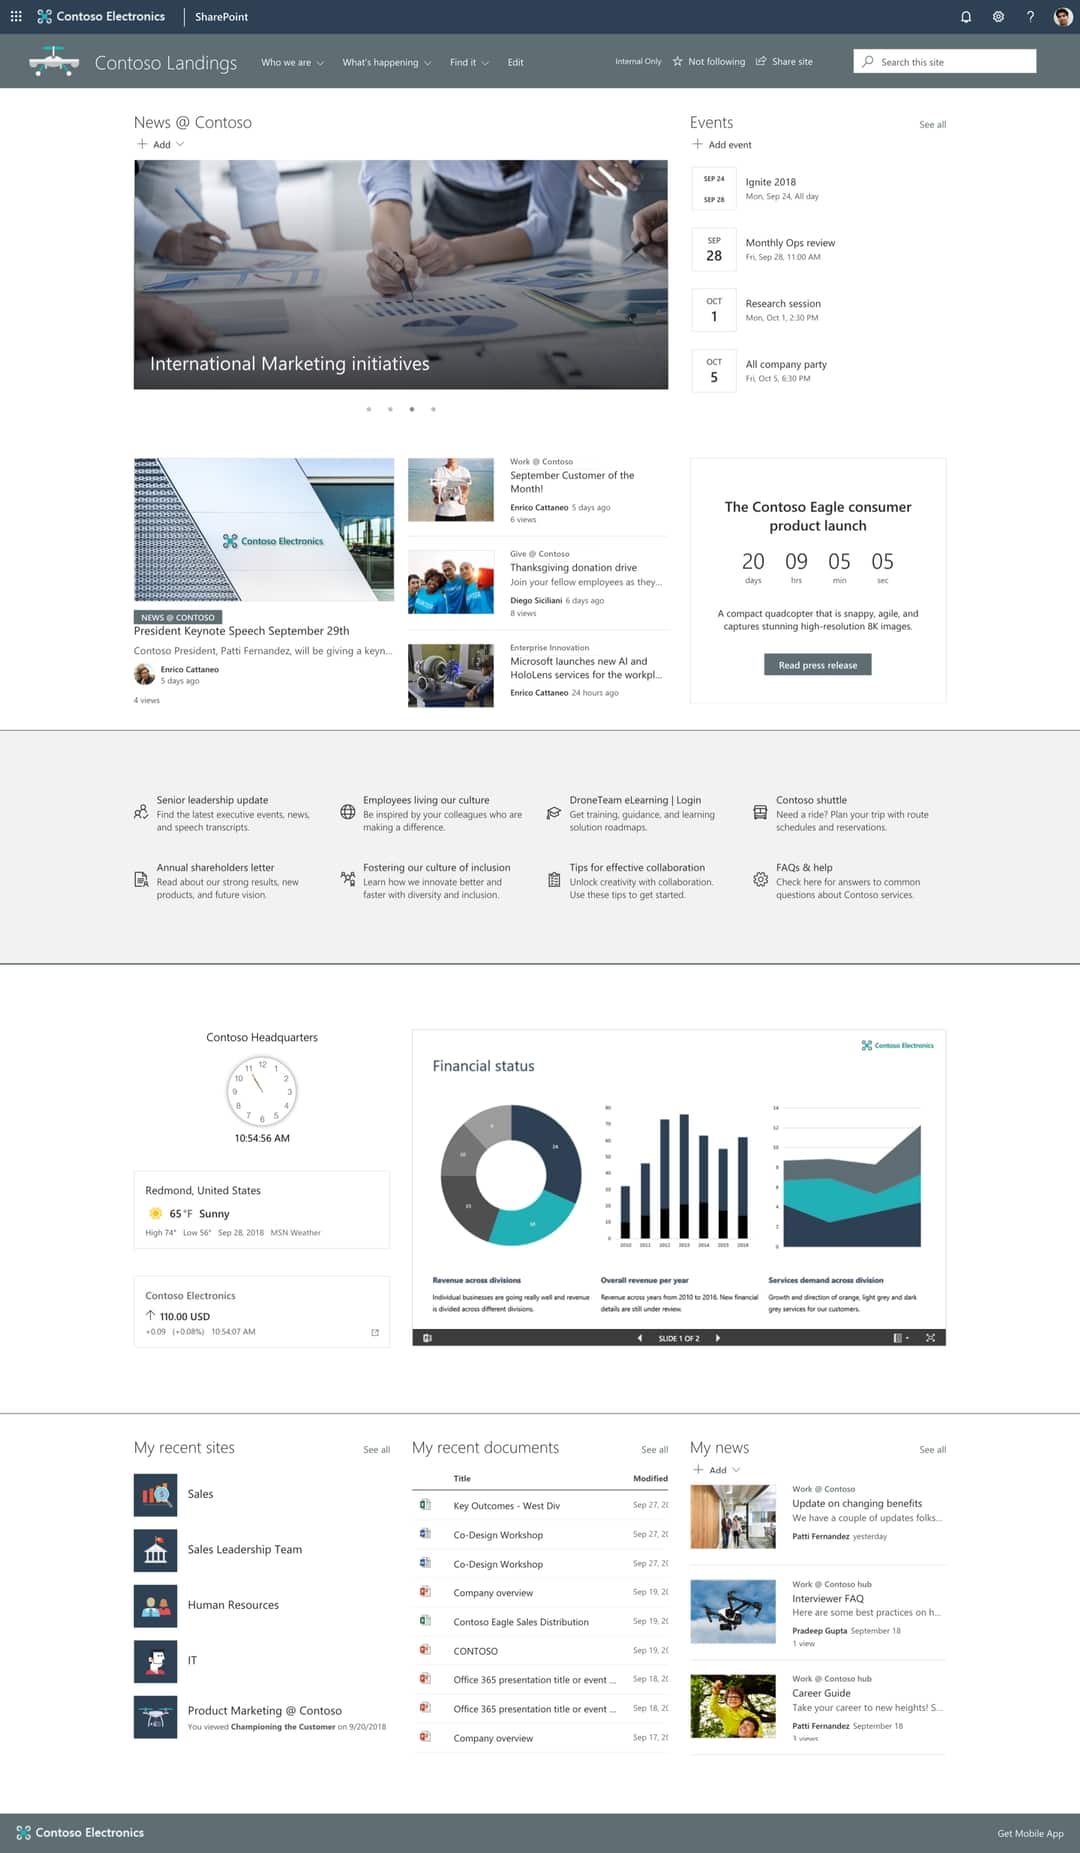 25 great examples of SharePoint Intranet in Microsoft 365